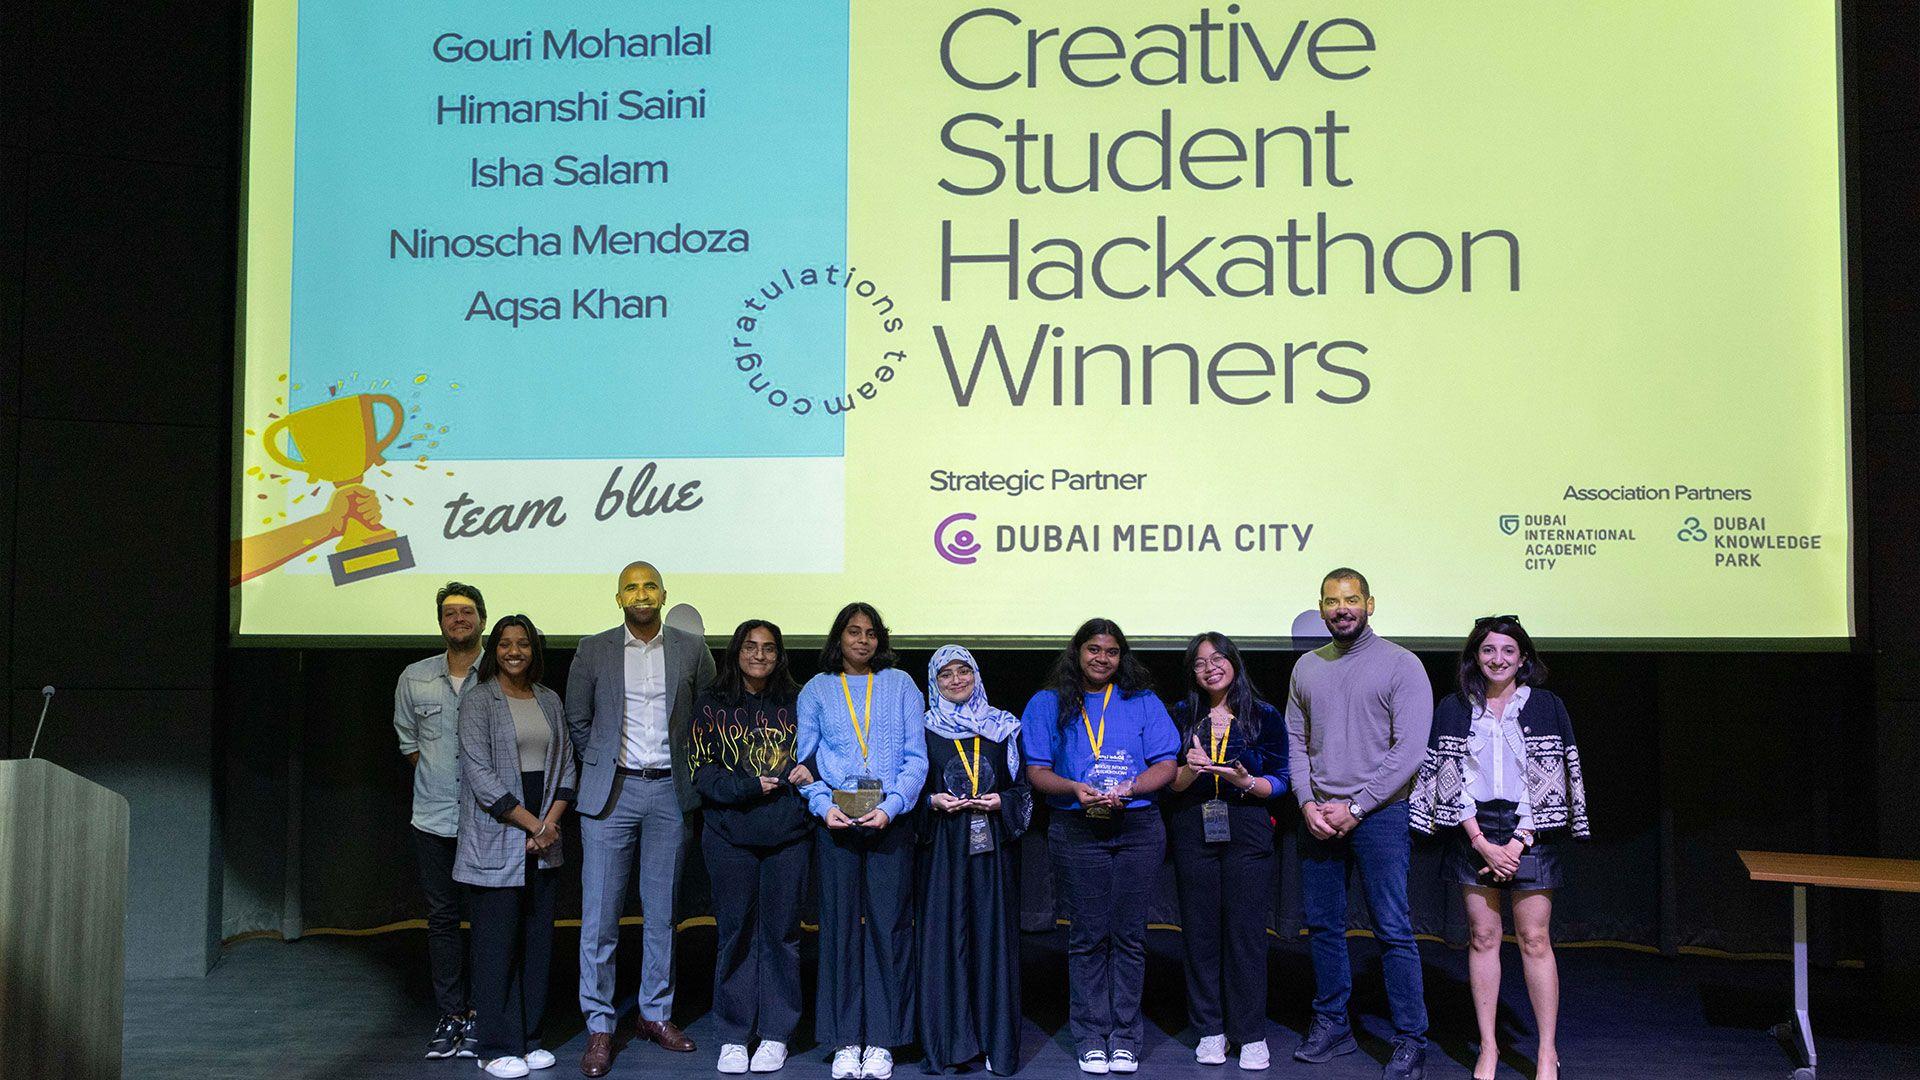 MDX Students Take First Place at Dubai Lynx Creative Student Hackathon